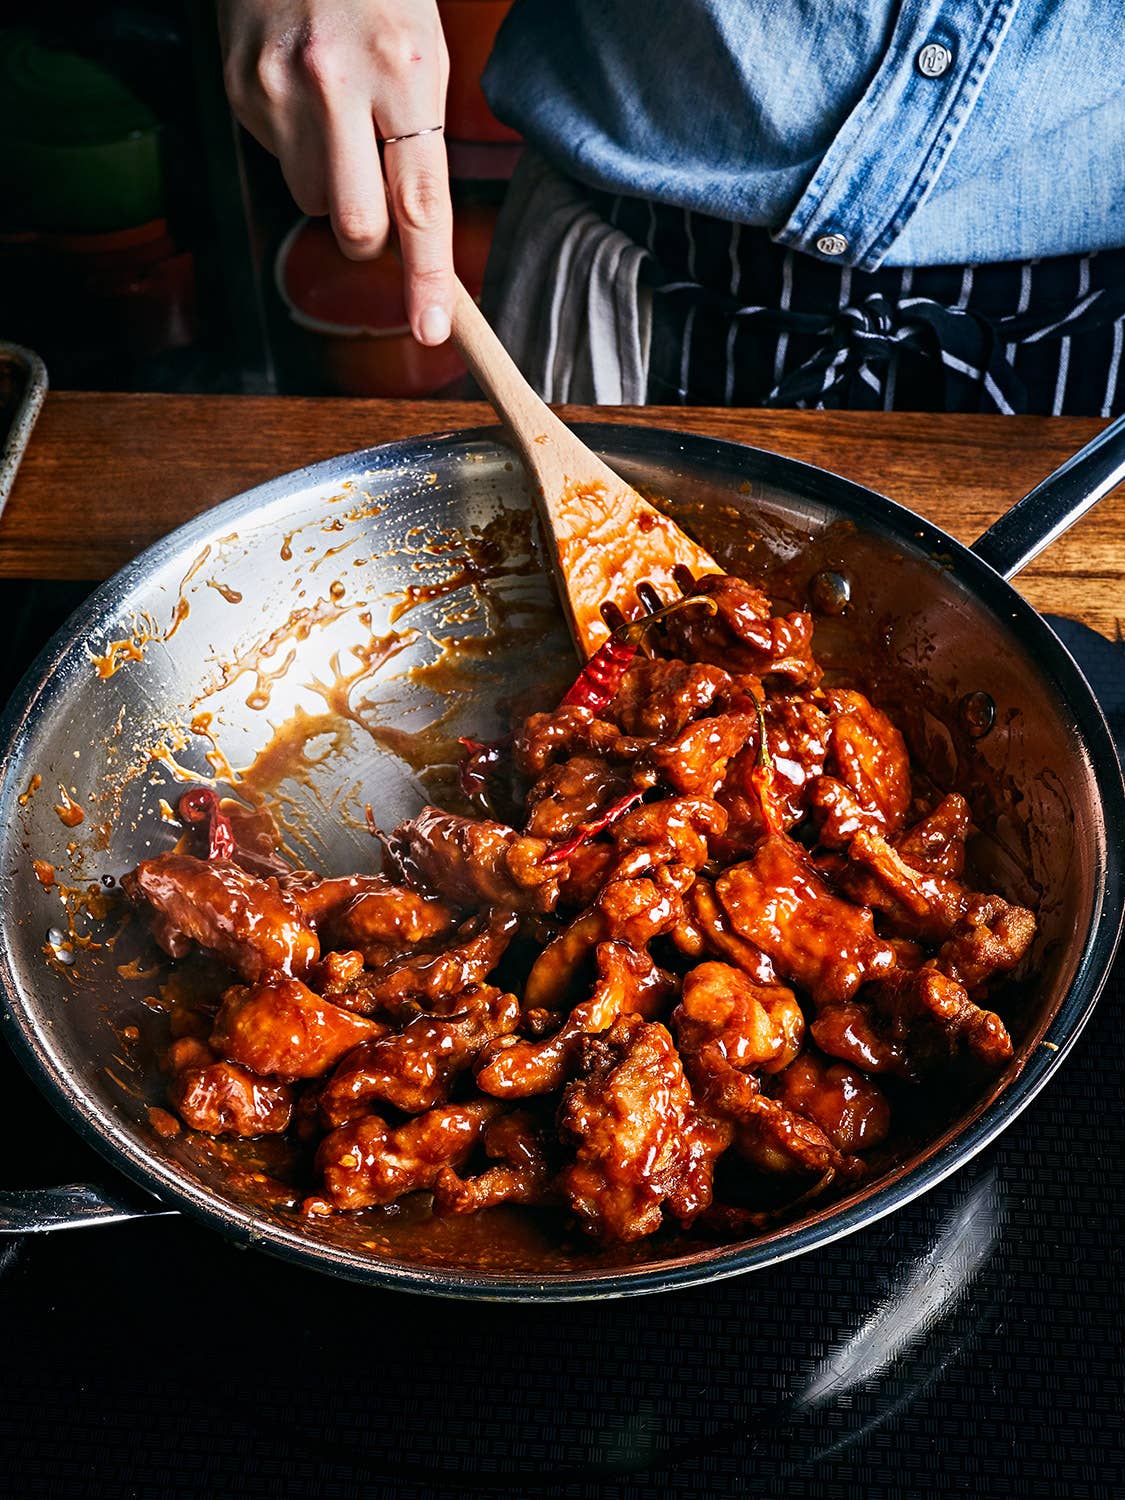 How To Make General Tso’s Chicken